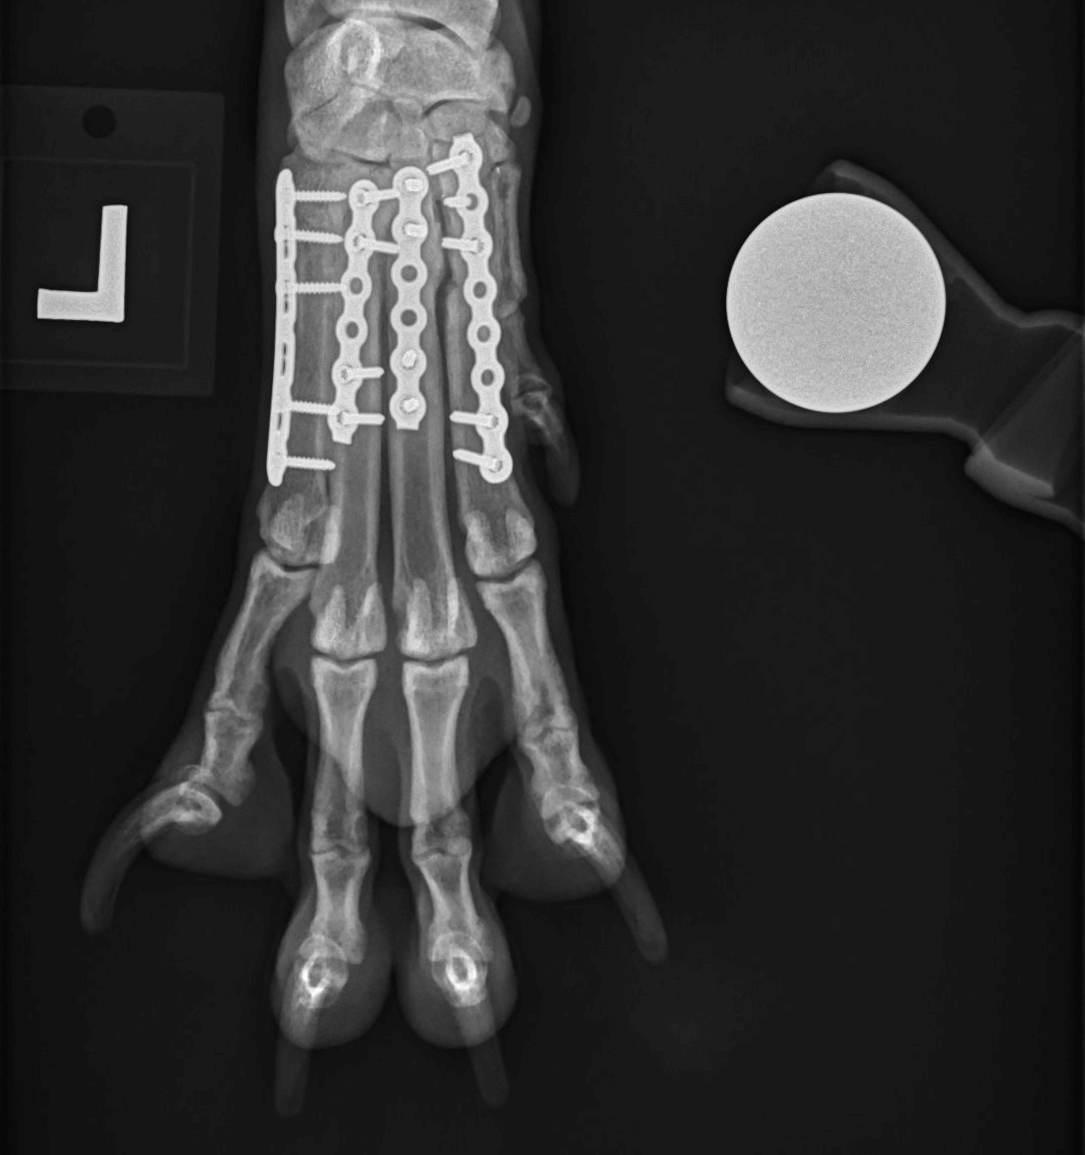 An x-ray showing the plates and screws in Ruby's foot